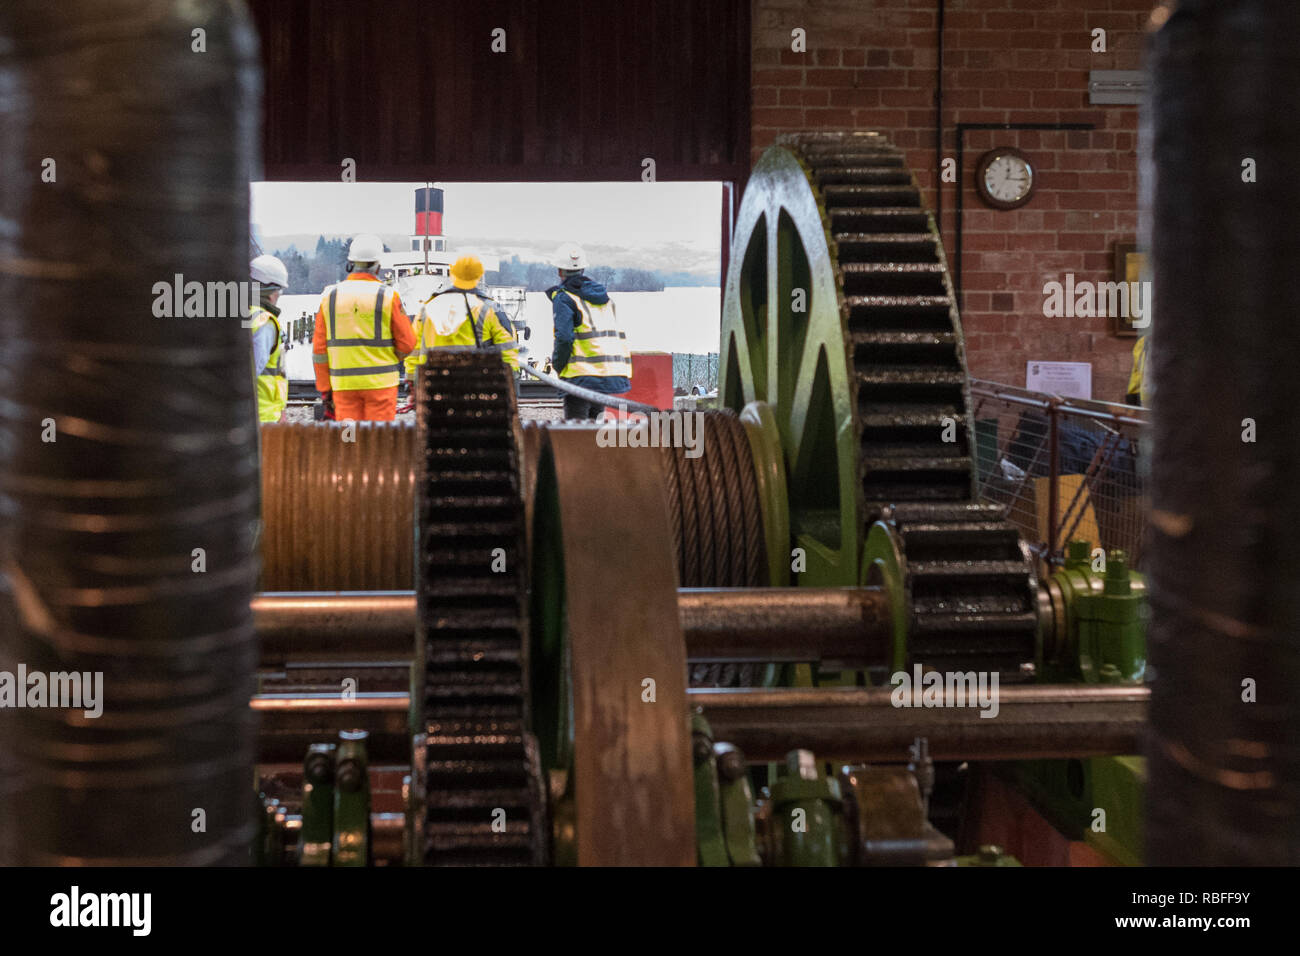 Balloch, Loch Lomond, Scotland, UK. 10th Jan, 2018. The Maid of the Loch at the end of Balloch Steam Slipway, a Category A listed building prior to the start of winching to remove the boat from the water for major refurbishment - viewed from inside the original winchhouse. Unfortunately once winching began, the carriage broke and the boat rolled back down the slipway into the water Credit: Kay Roxby/Alamy Live News Stock Photo